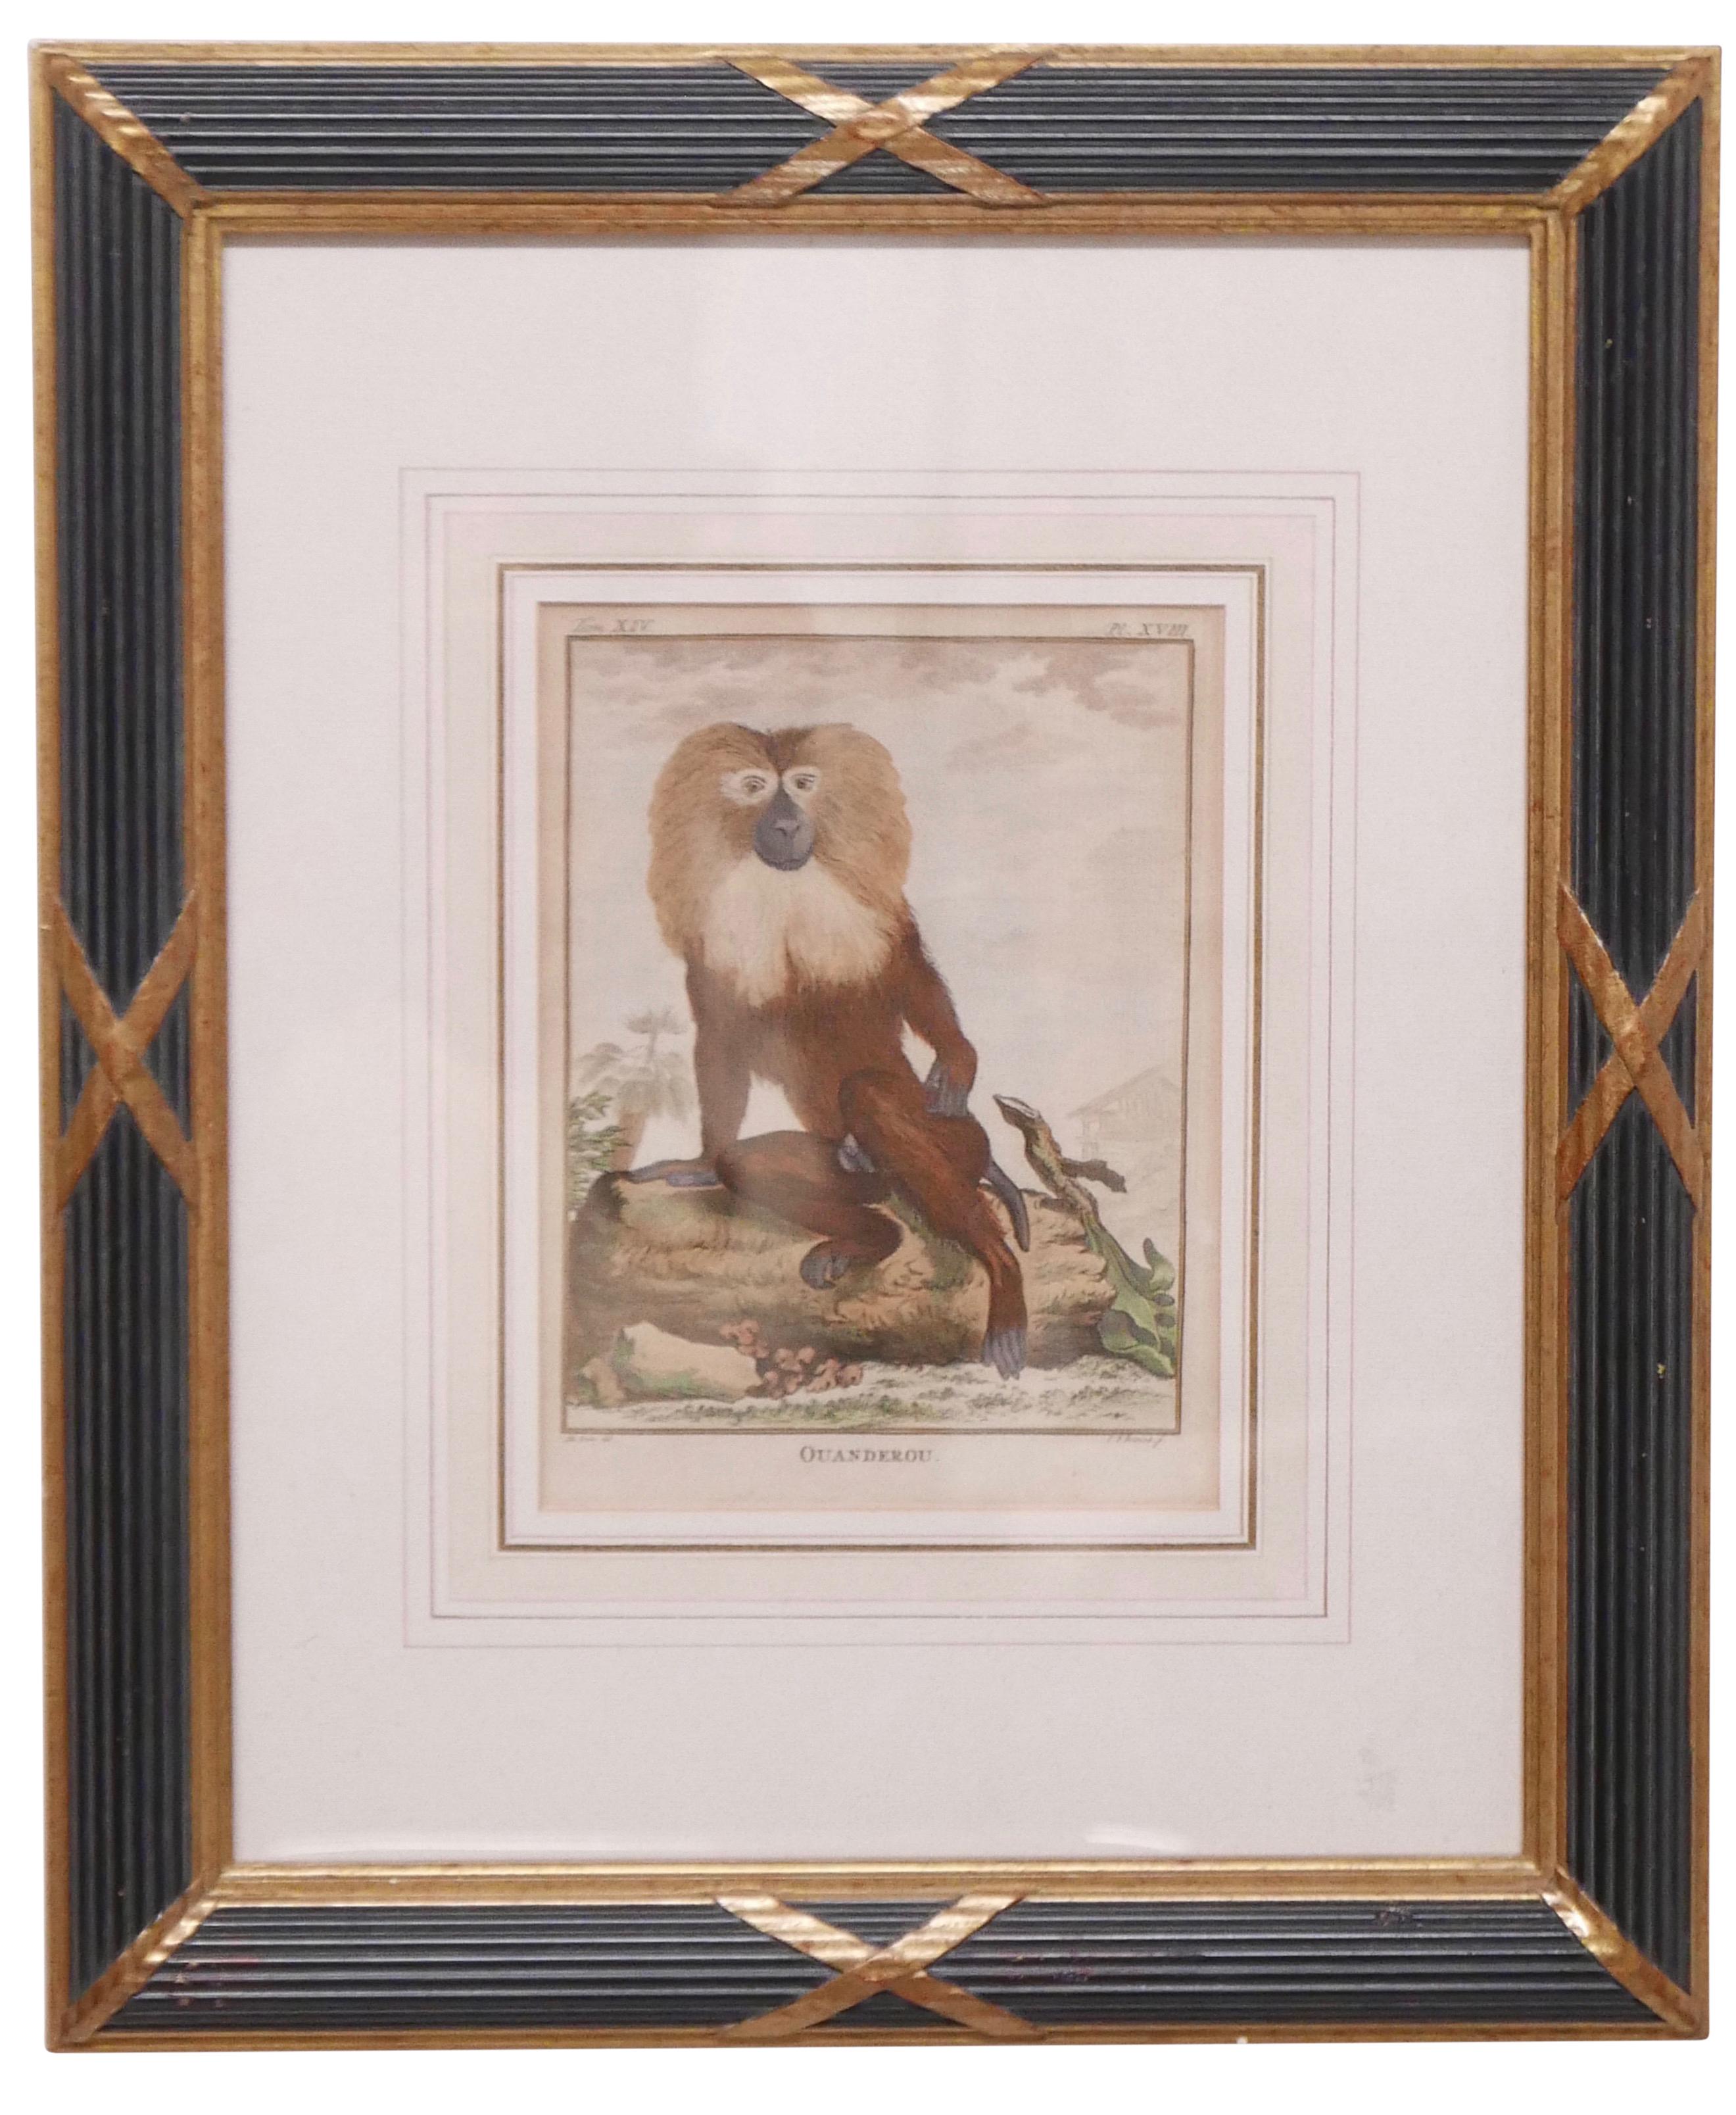 Three Framed Antique Hand Colored Monkey Engravings - Early 19th Century 2